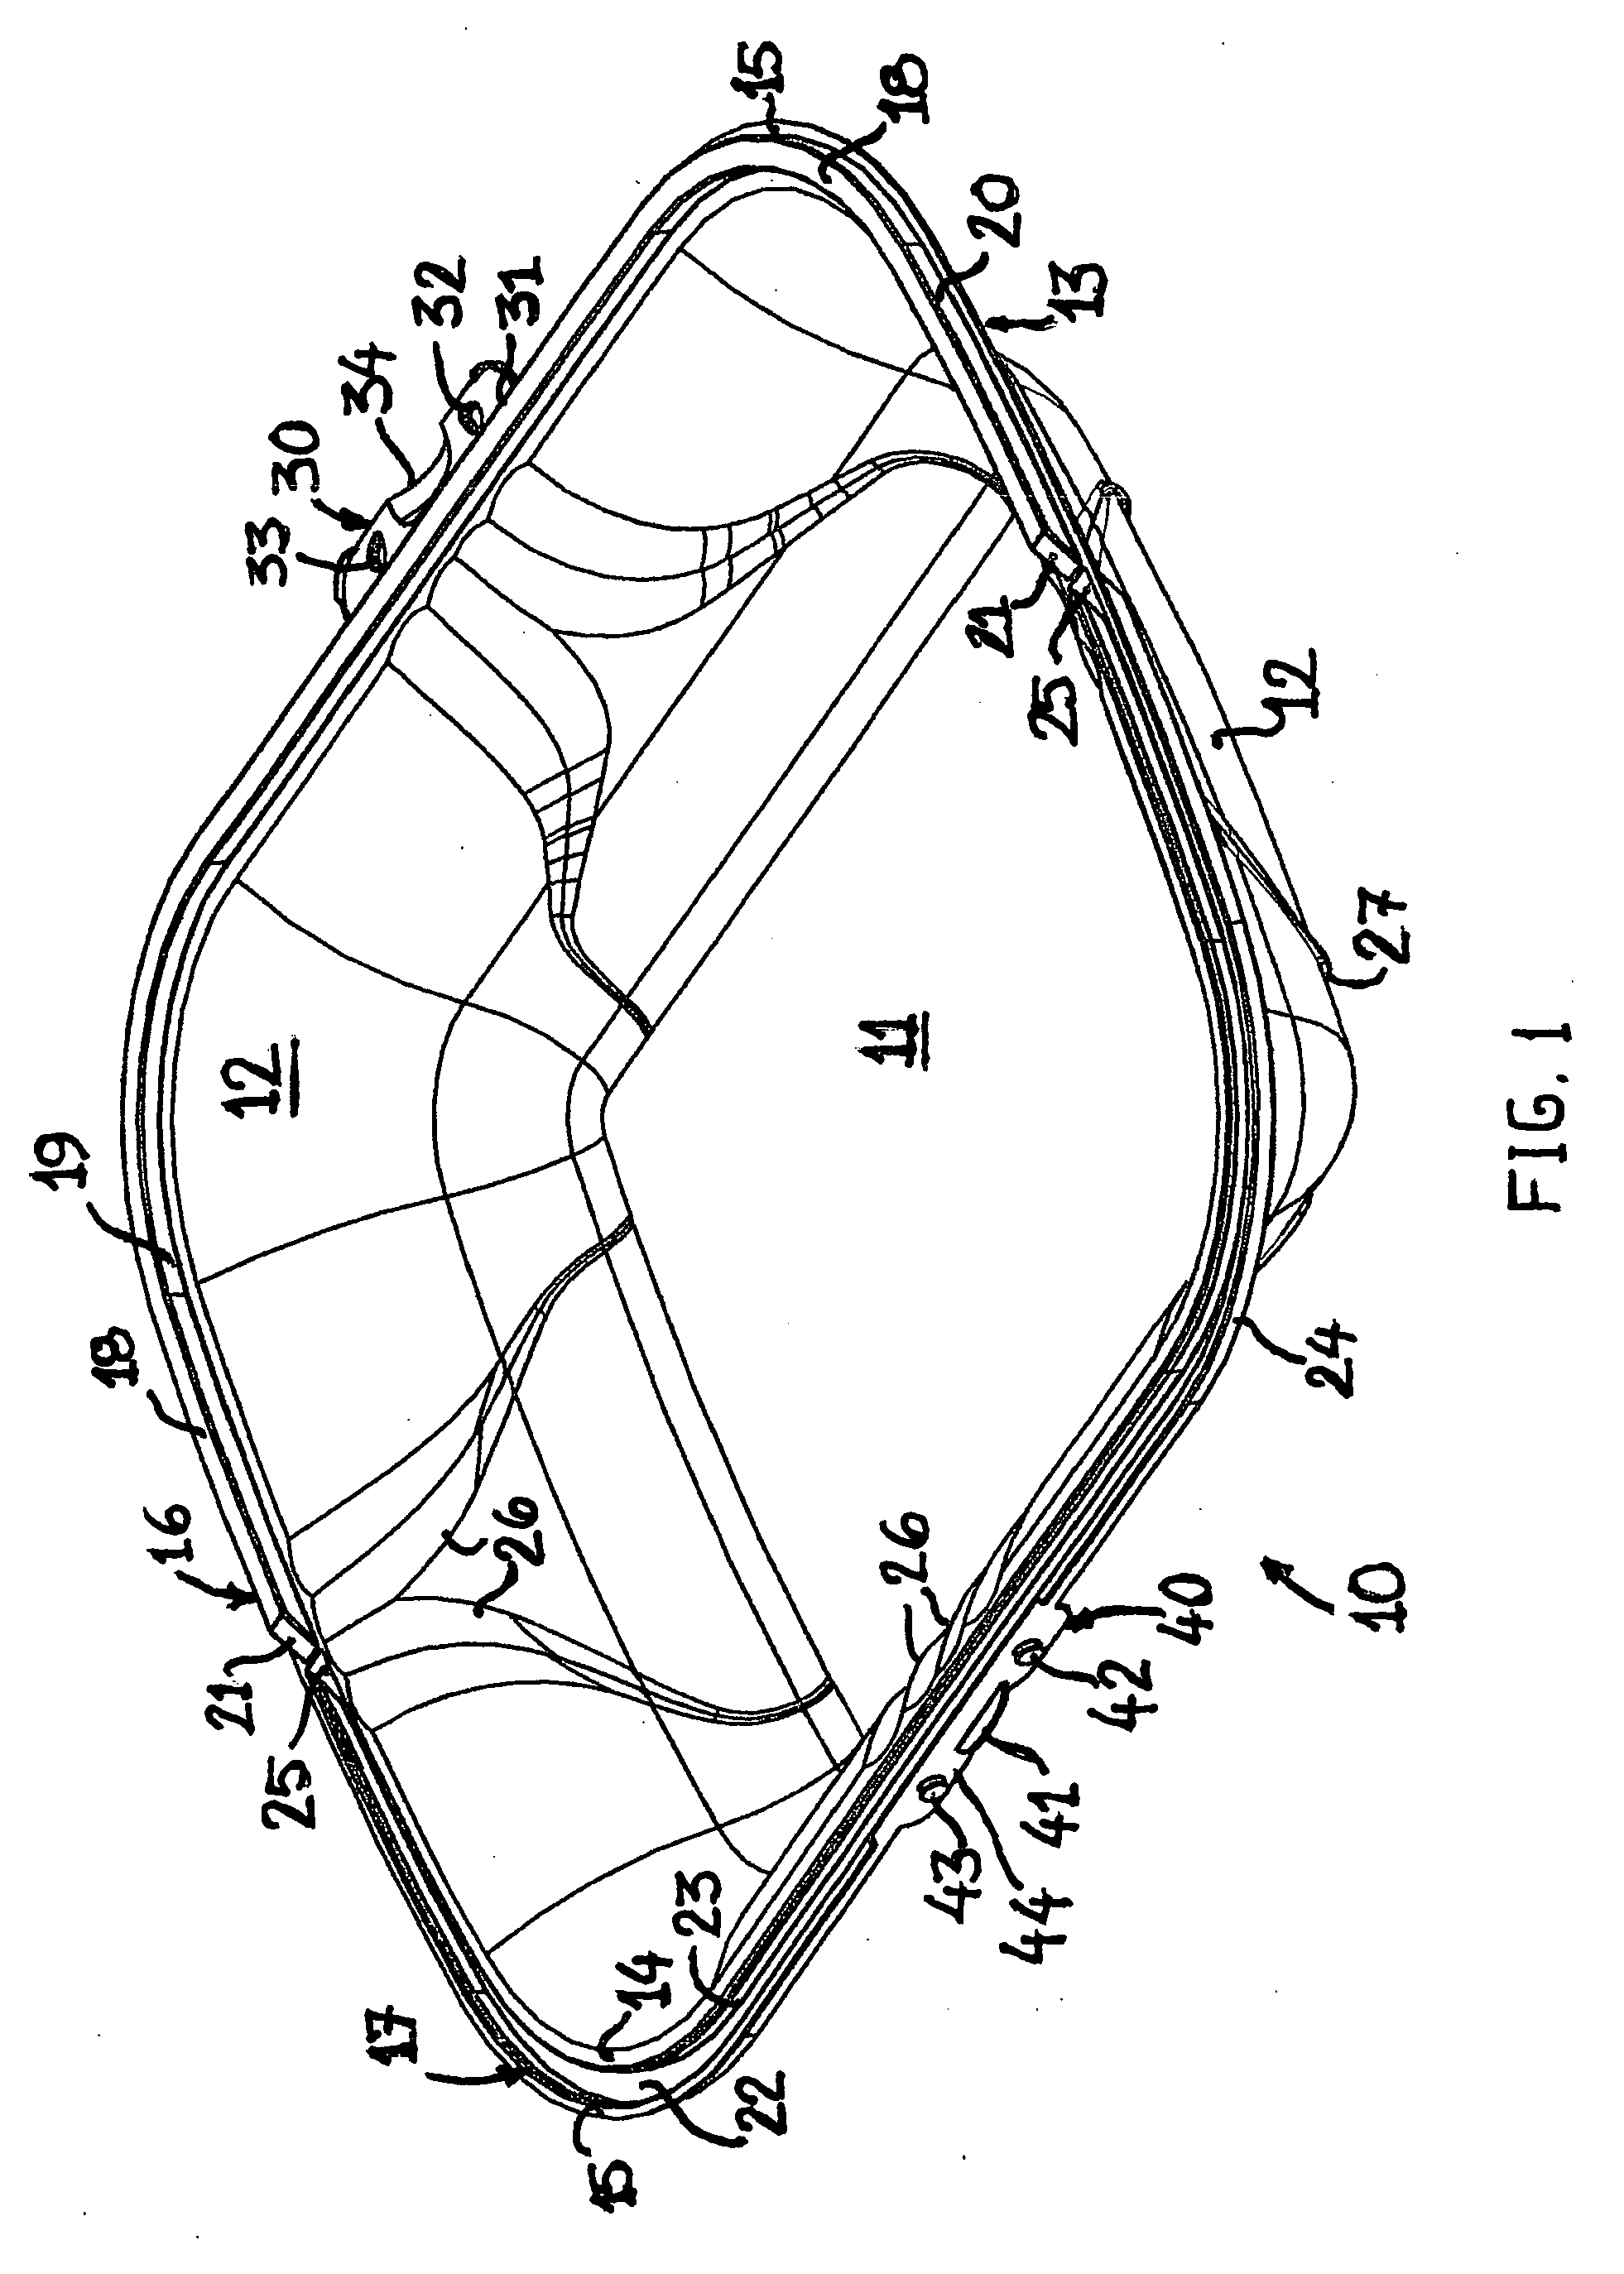 Food container assembly with integral hinge/latch combination and method therefor